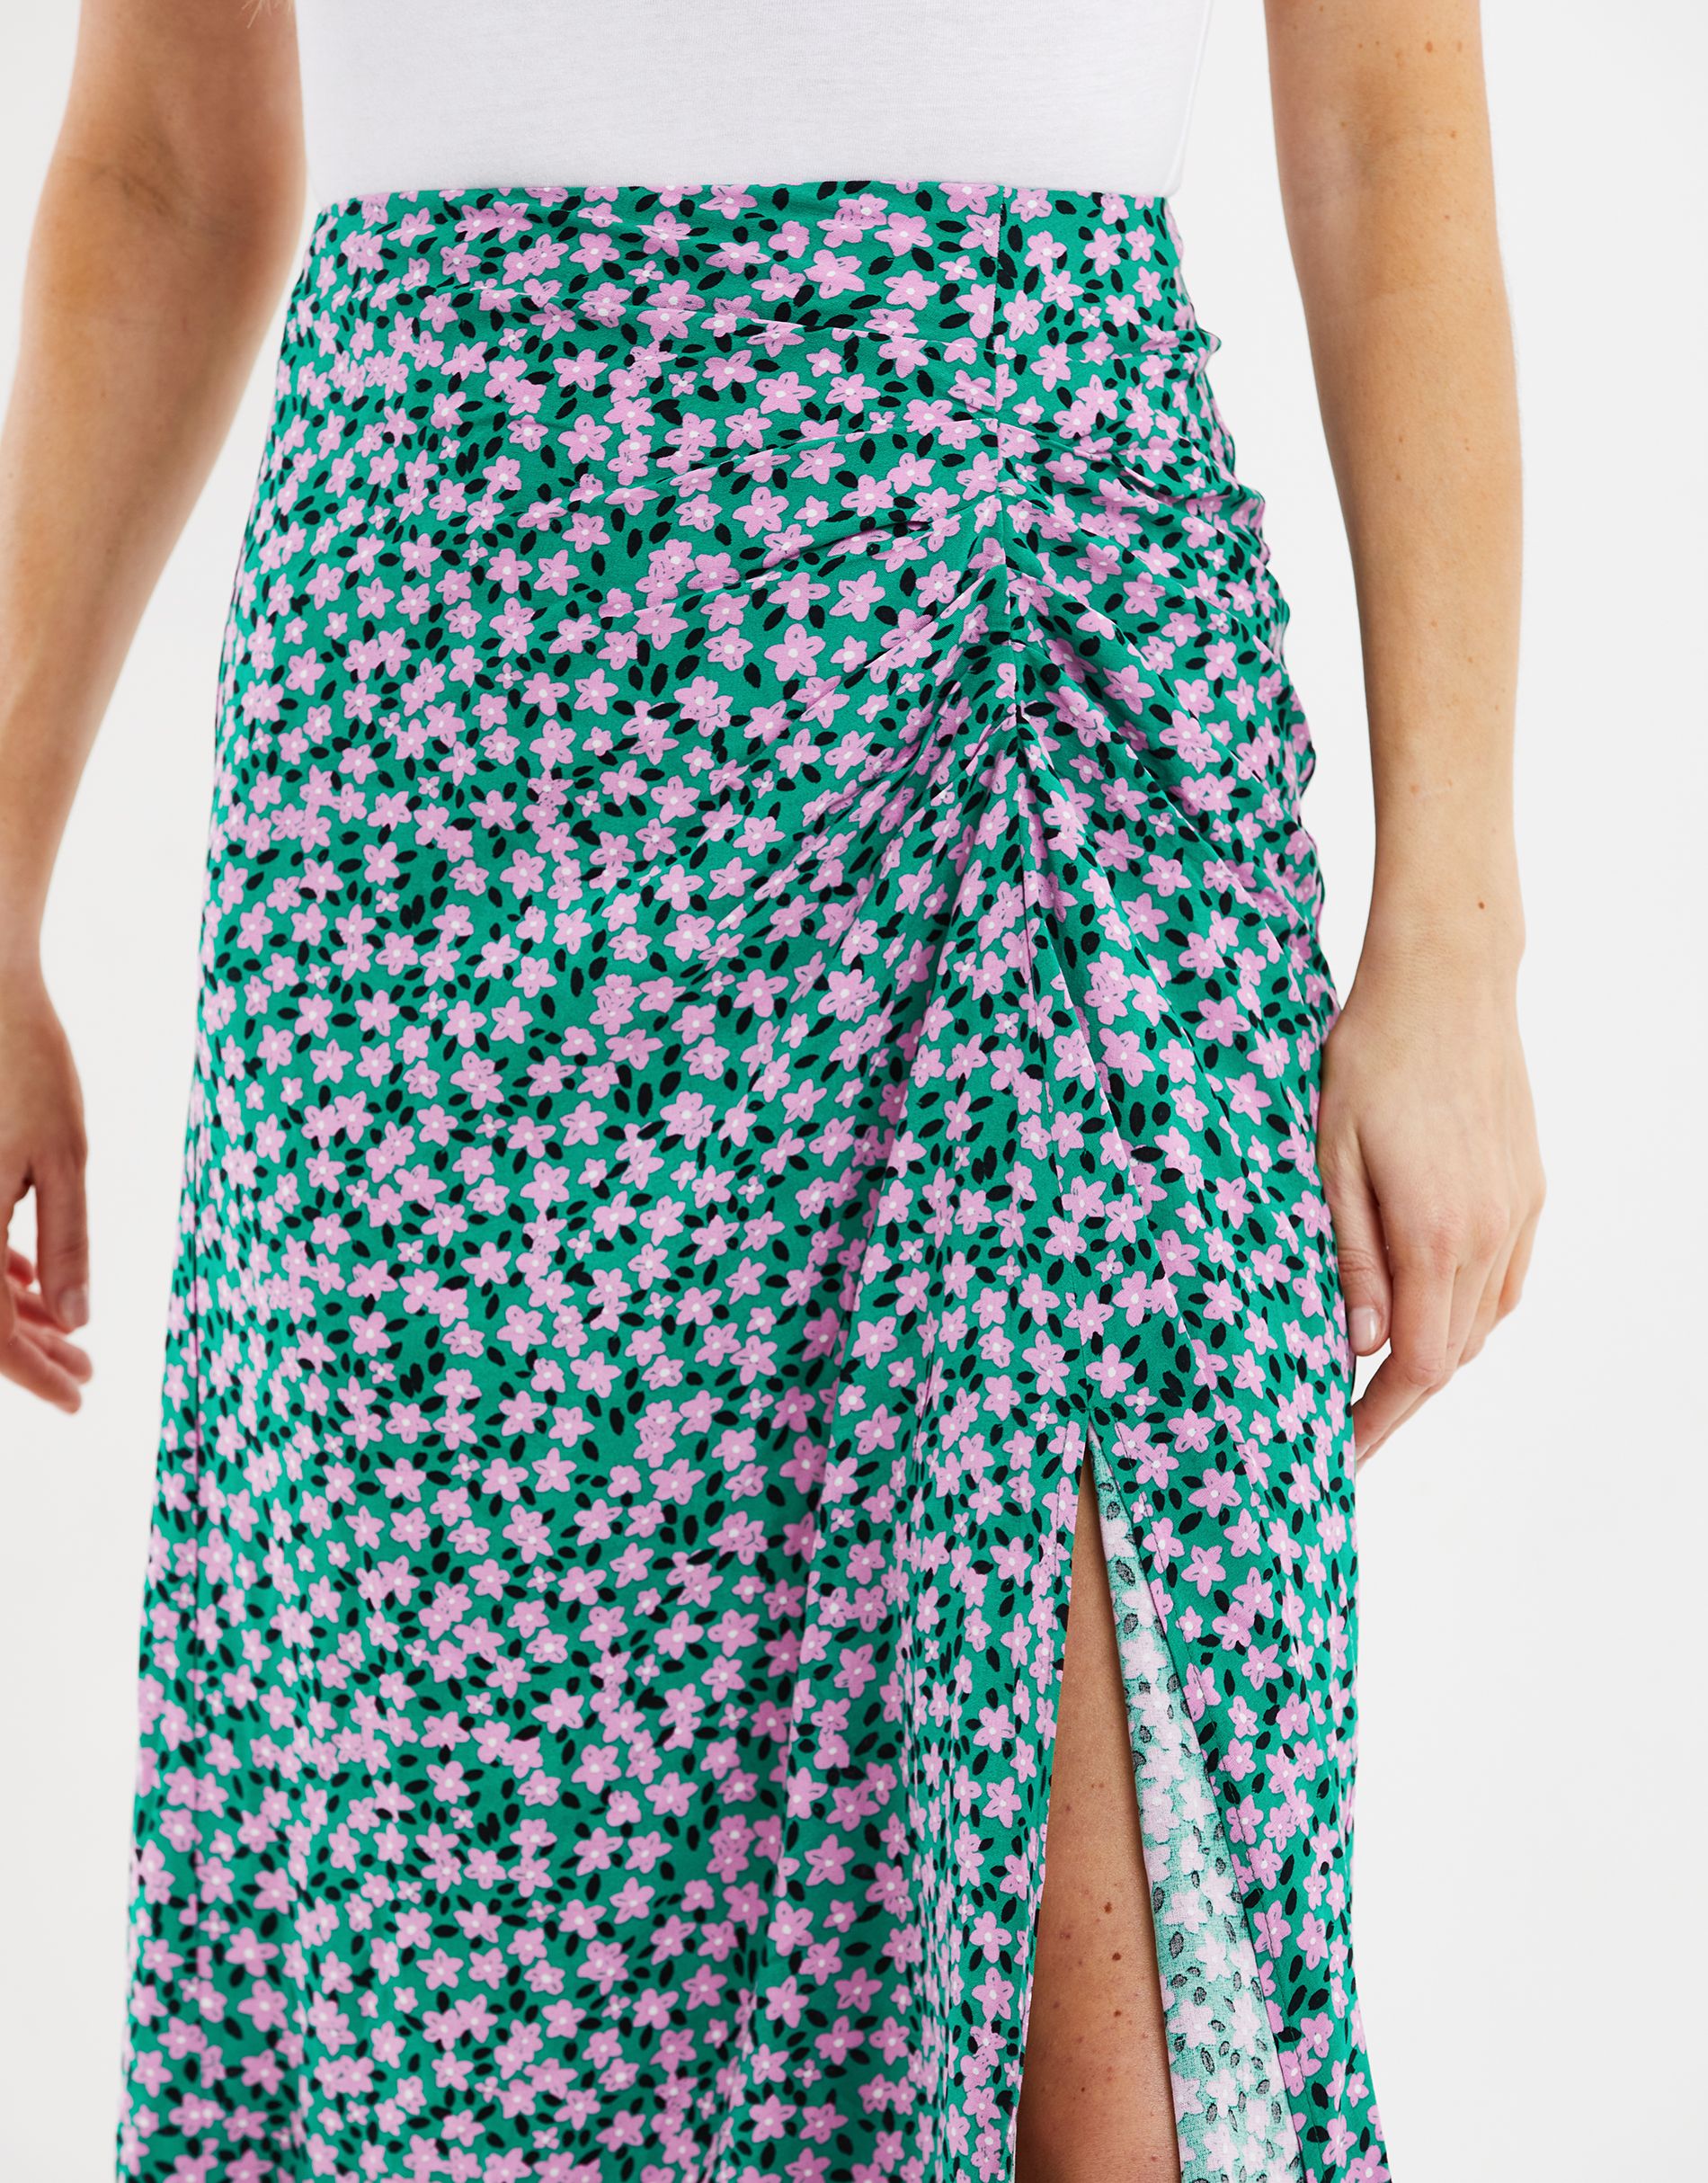 Elevate your spring/summer essentials with this ruched front midi skirt in a pretty green and pink floral print. With a concealed side zip fastening and split up the leg, this midi skirt hits the trends as well as being a versatile piece that you can experiement styling up or down.